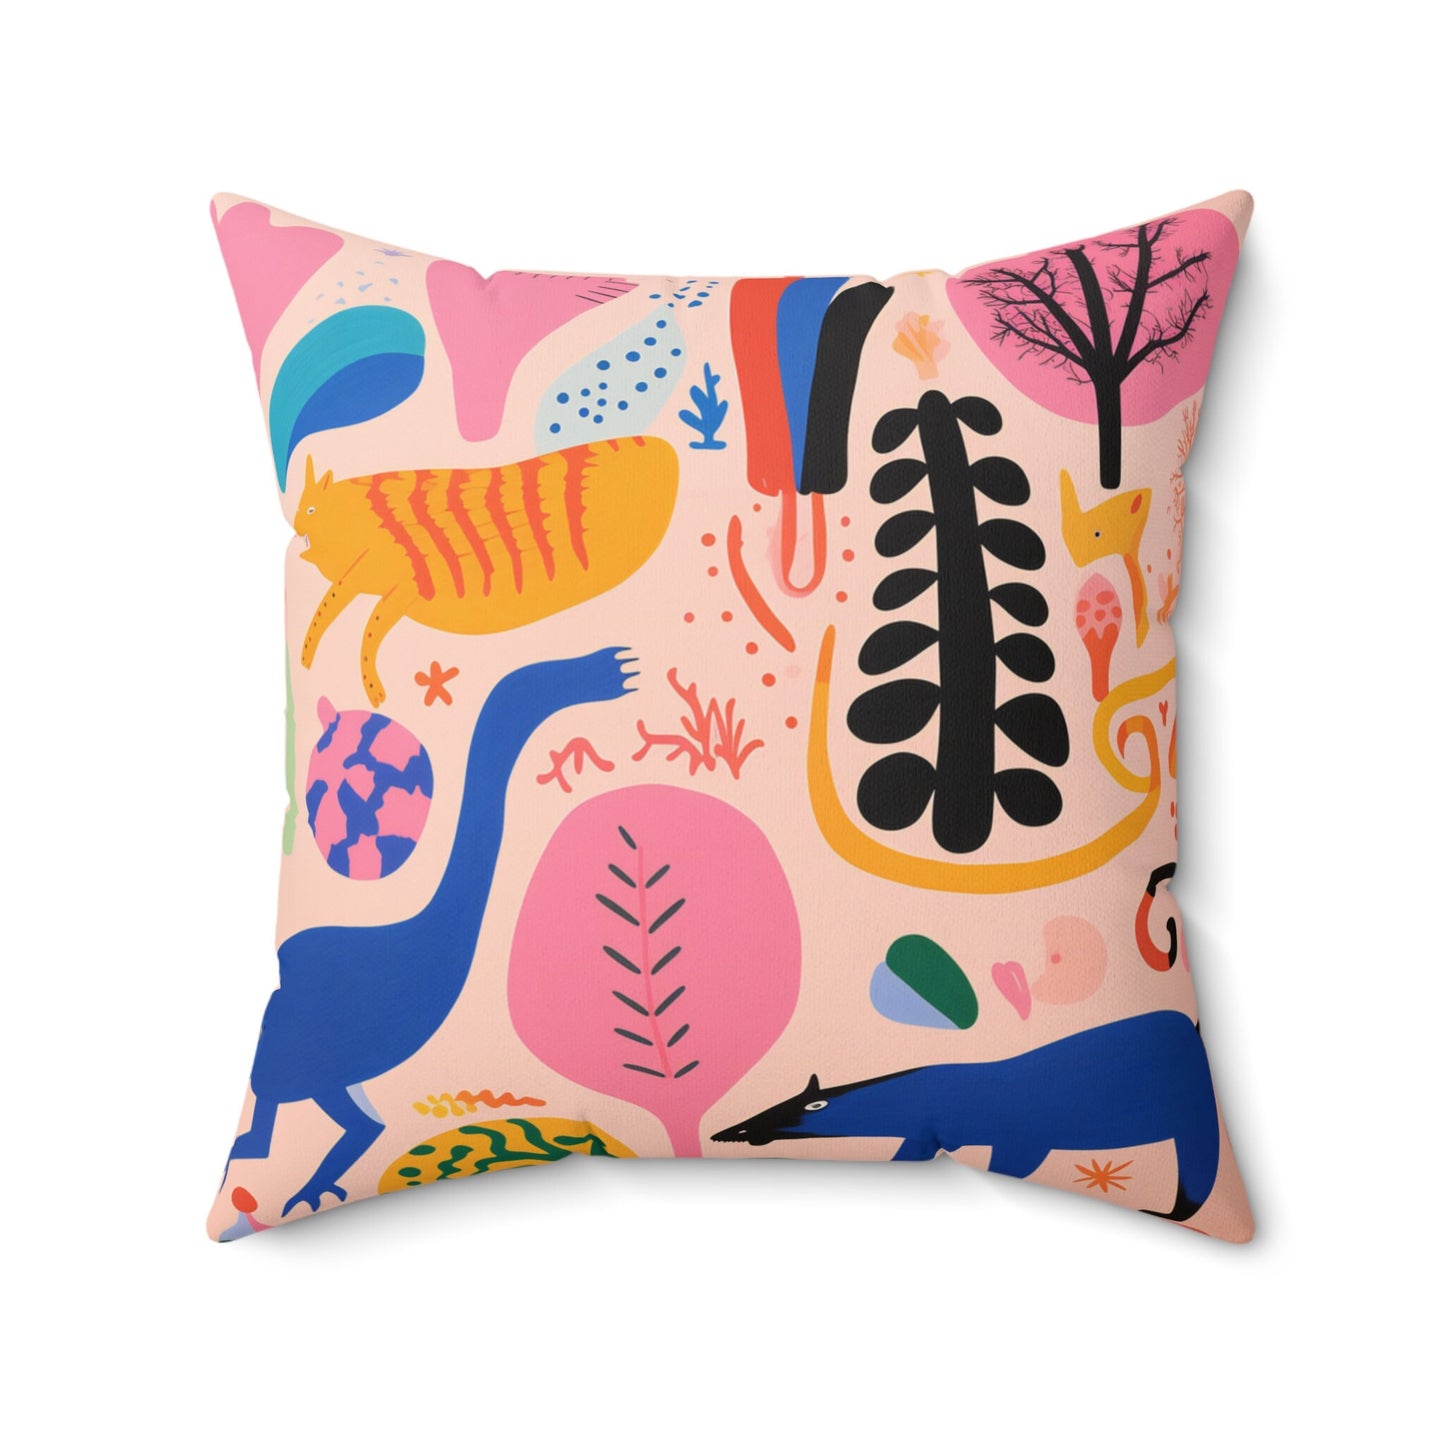 Pillow • Artistic Cushion Home Decor Couch Spun Polyester Square • Homedecor Accessory • Tropical Holiday